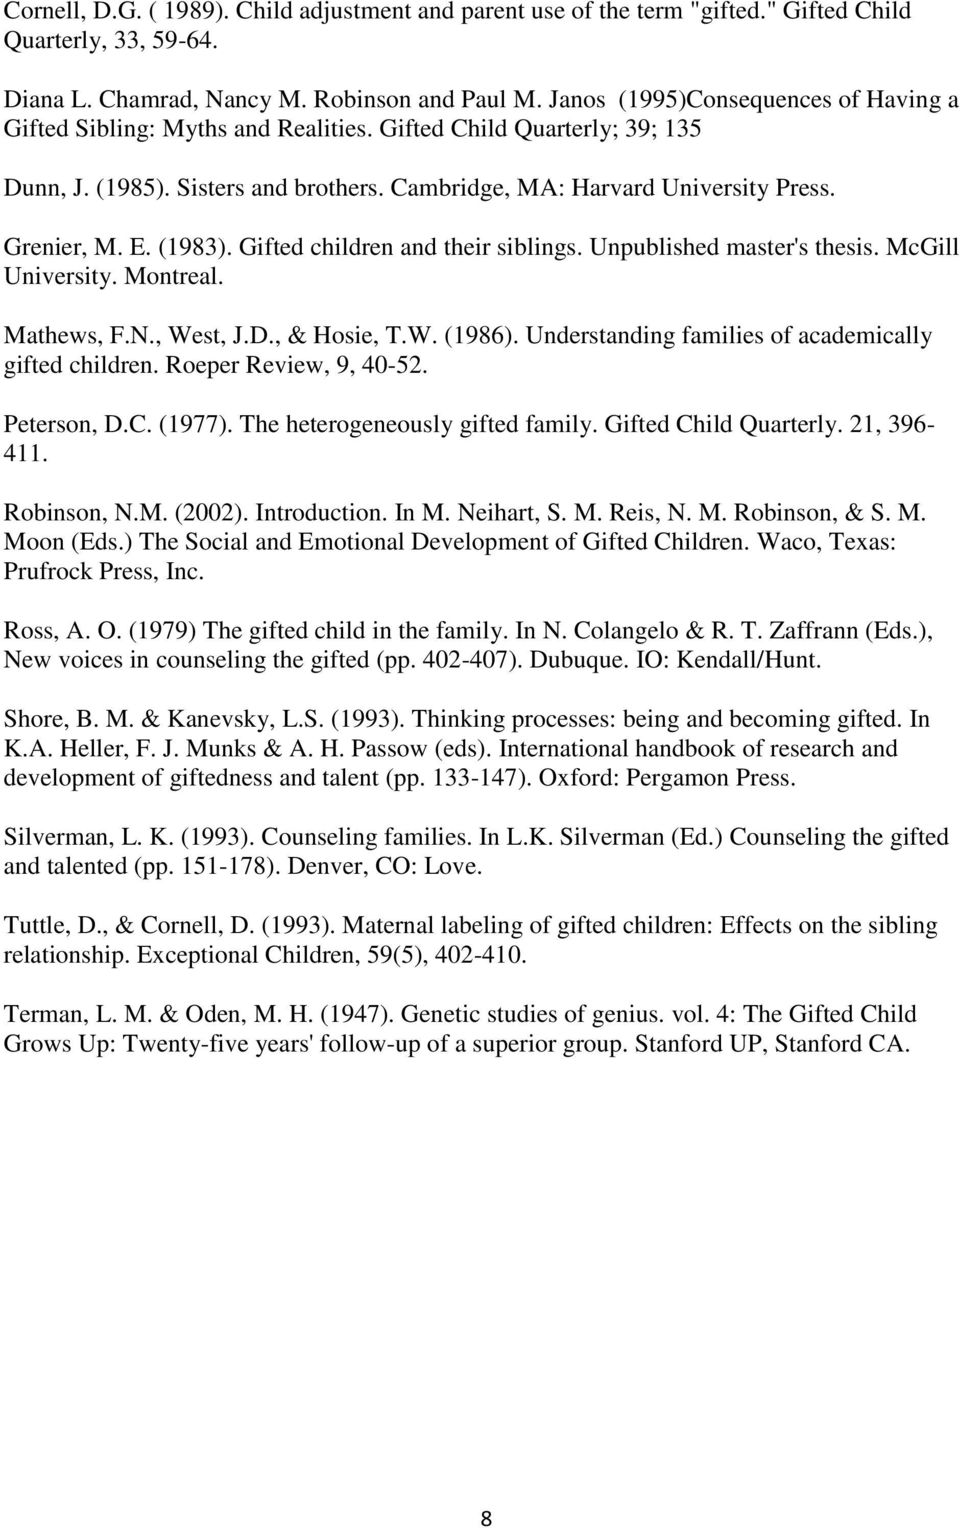 (1983). Gifted children and their siblings. Unpublished master's thesis. McGill University. Montreal. Mathews, F.N., West, J.D., & Hosie, T.W. (1986).